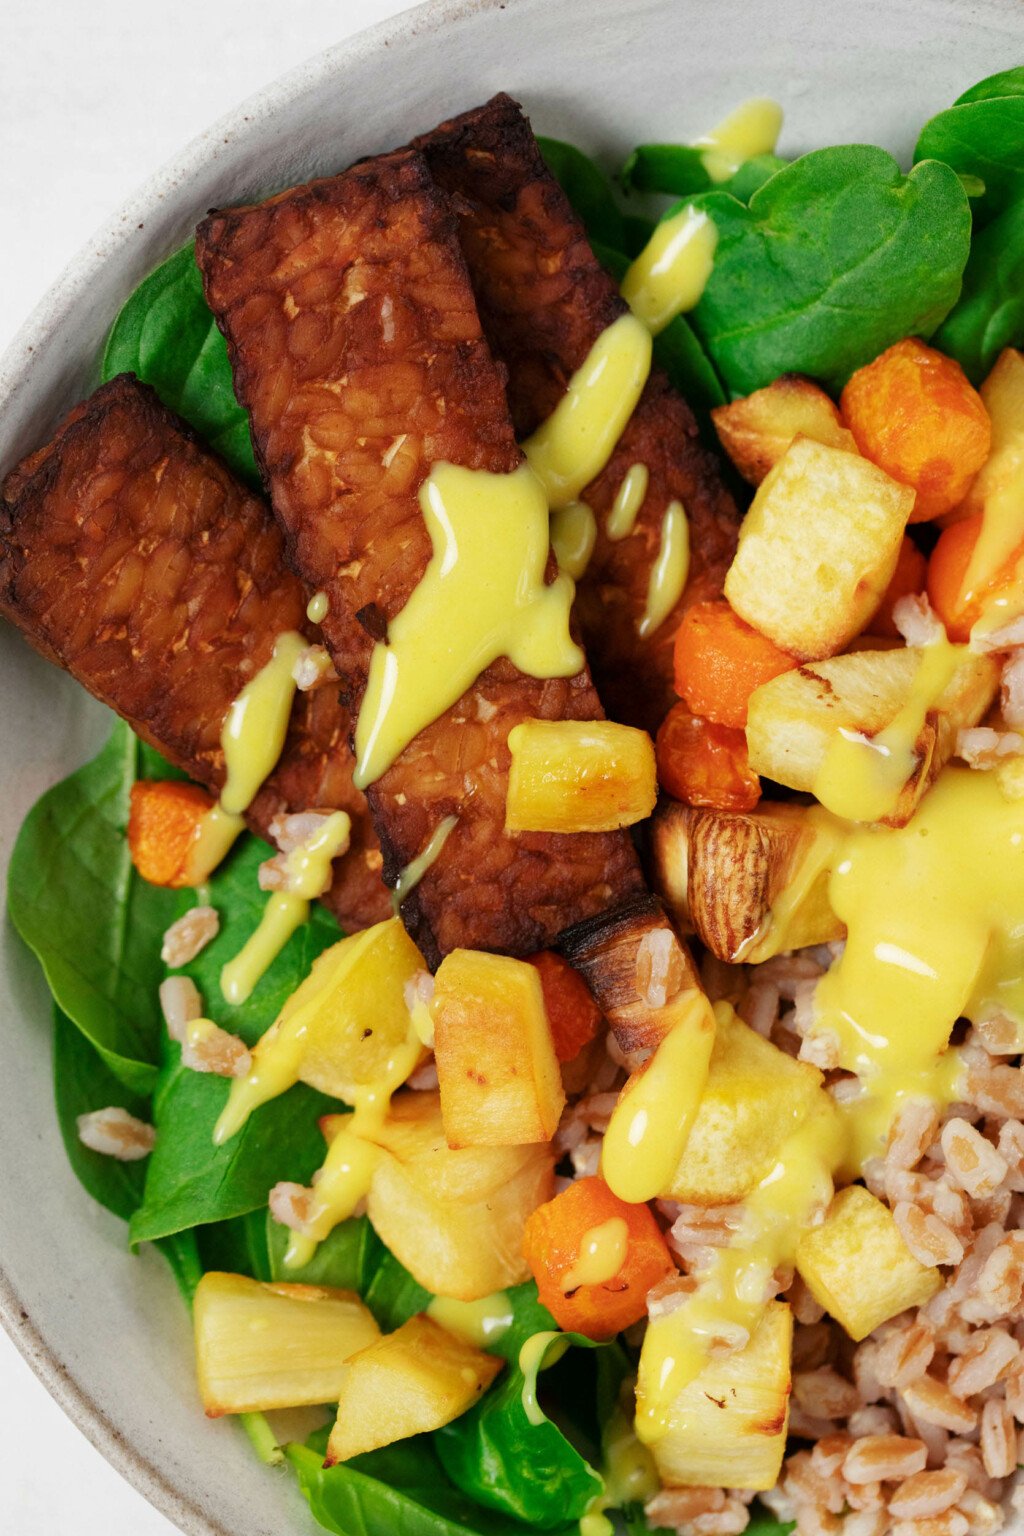 A close-up image of cooked tempeh, root vegetables, spinach, and a cooked whole grain.